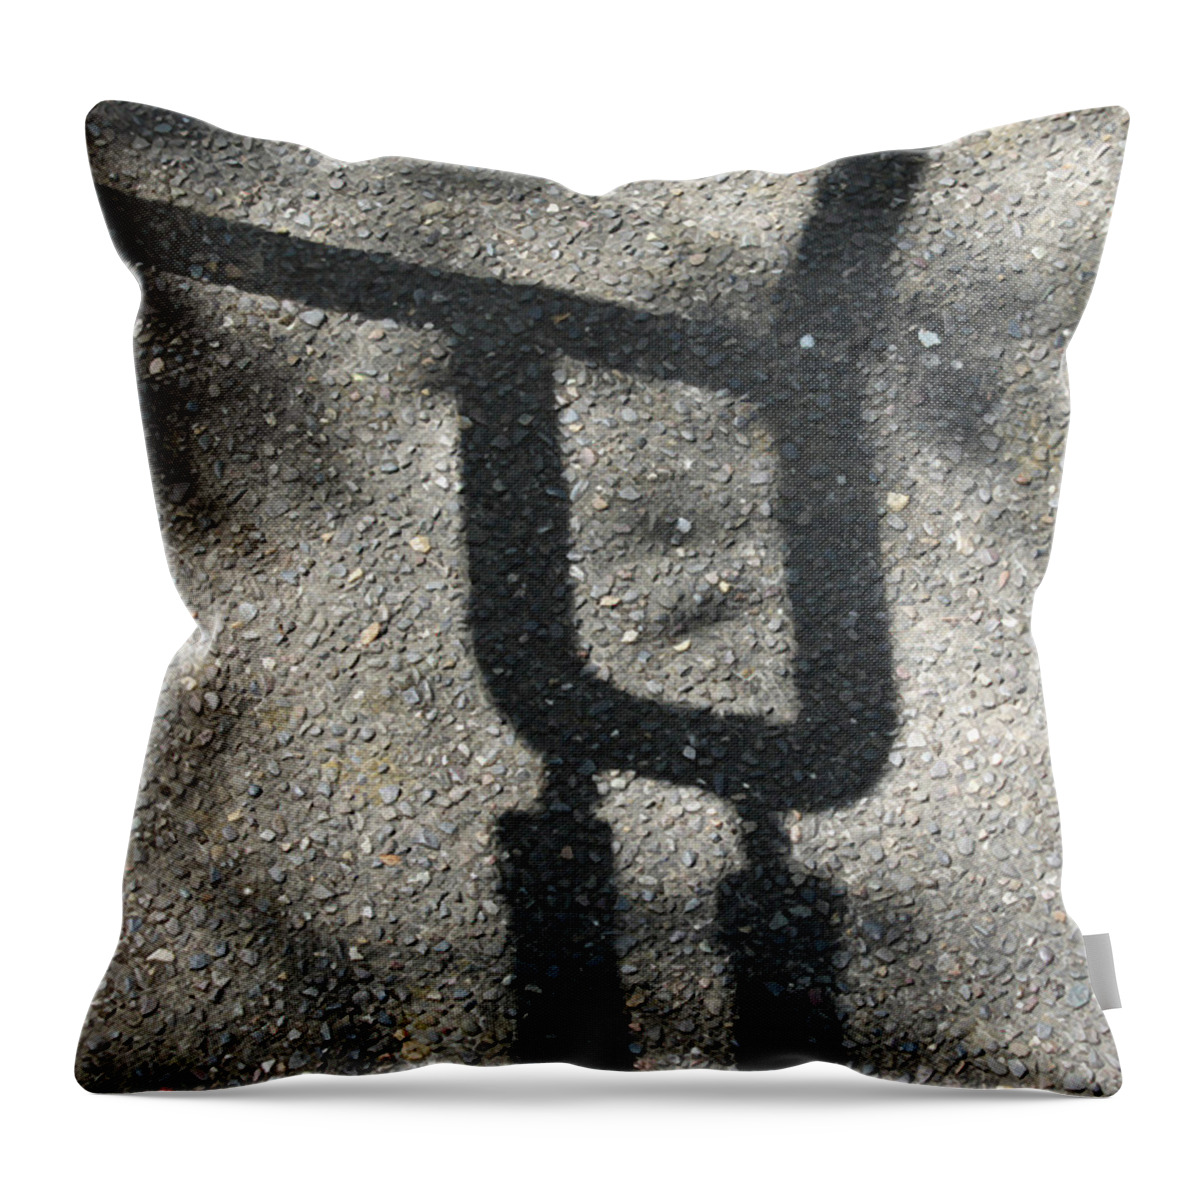 Photograph Throw Pillow featuring the photograph Alien Landed by Richard Wetterauer